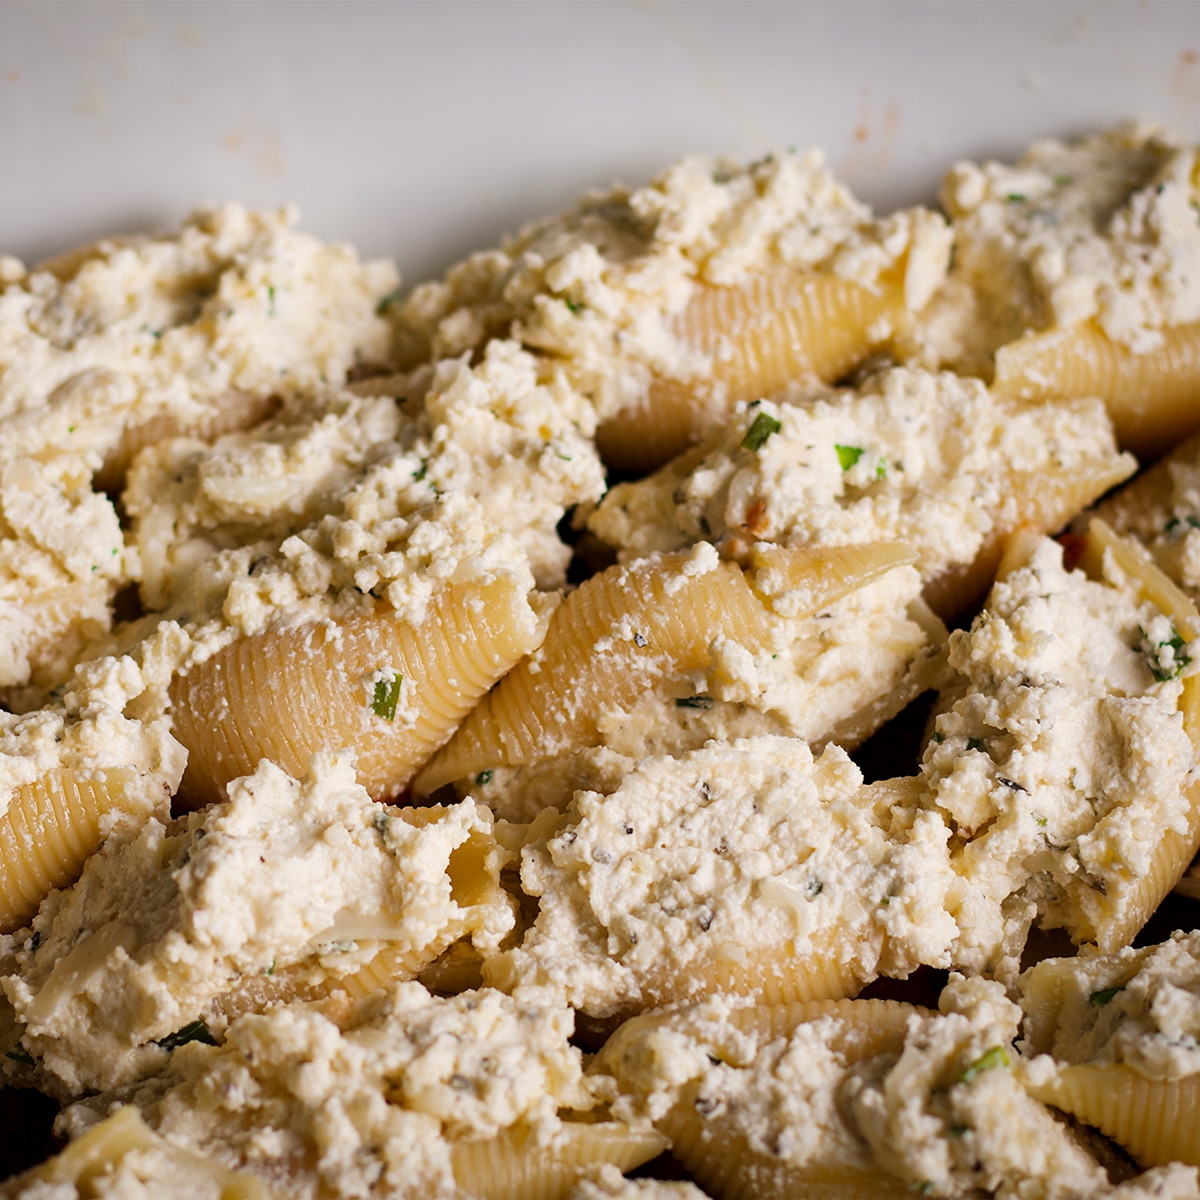 A casserole dish filled with pasta shells stuffed with ricotta cheese mixture.